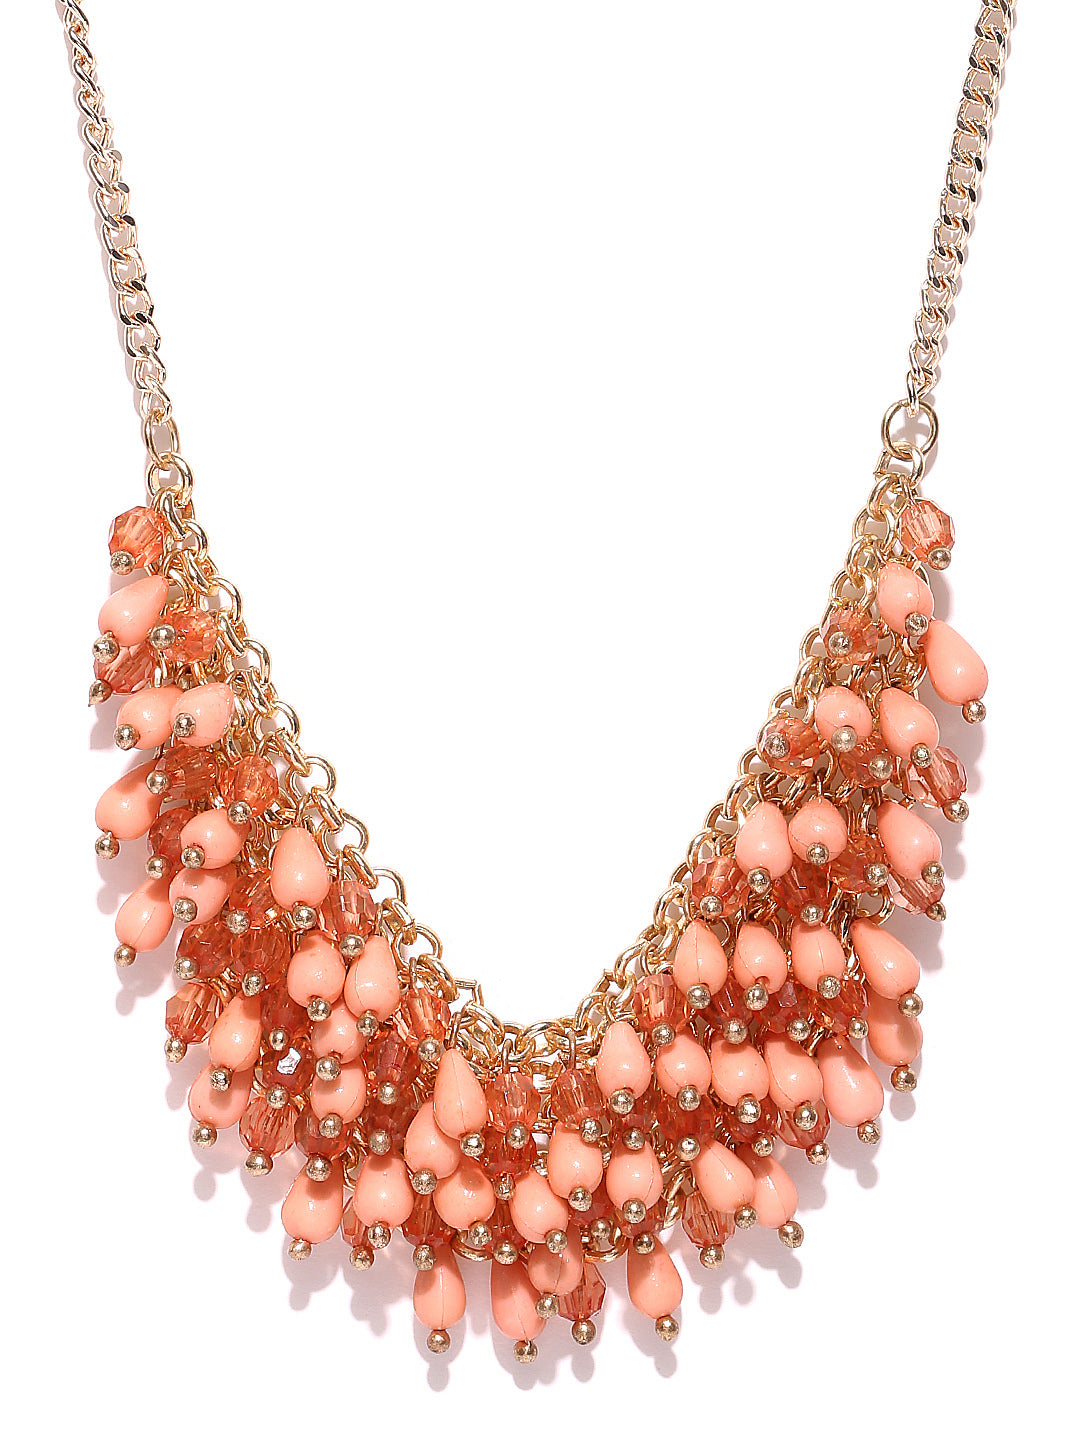 Blueberry peach and gold toned beaded necklace